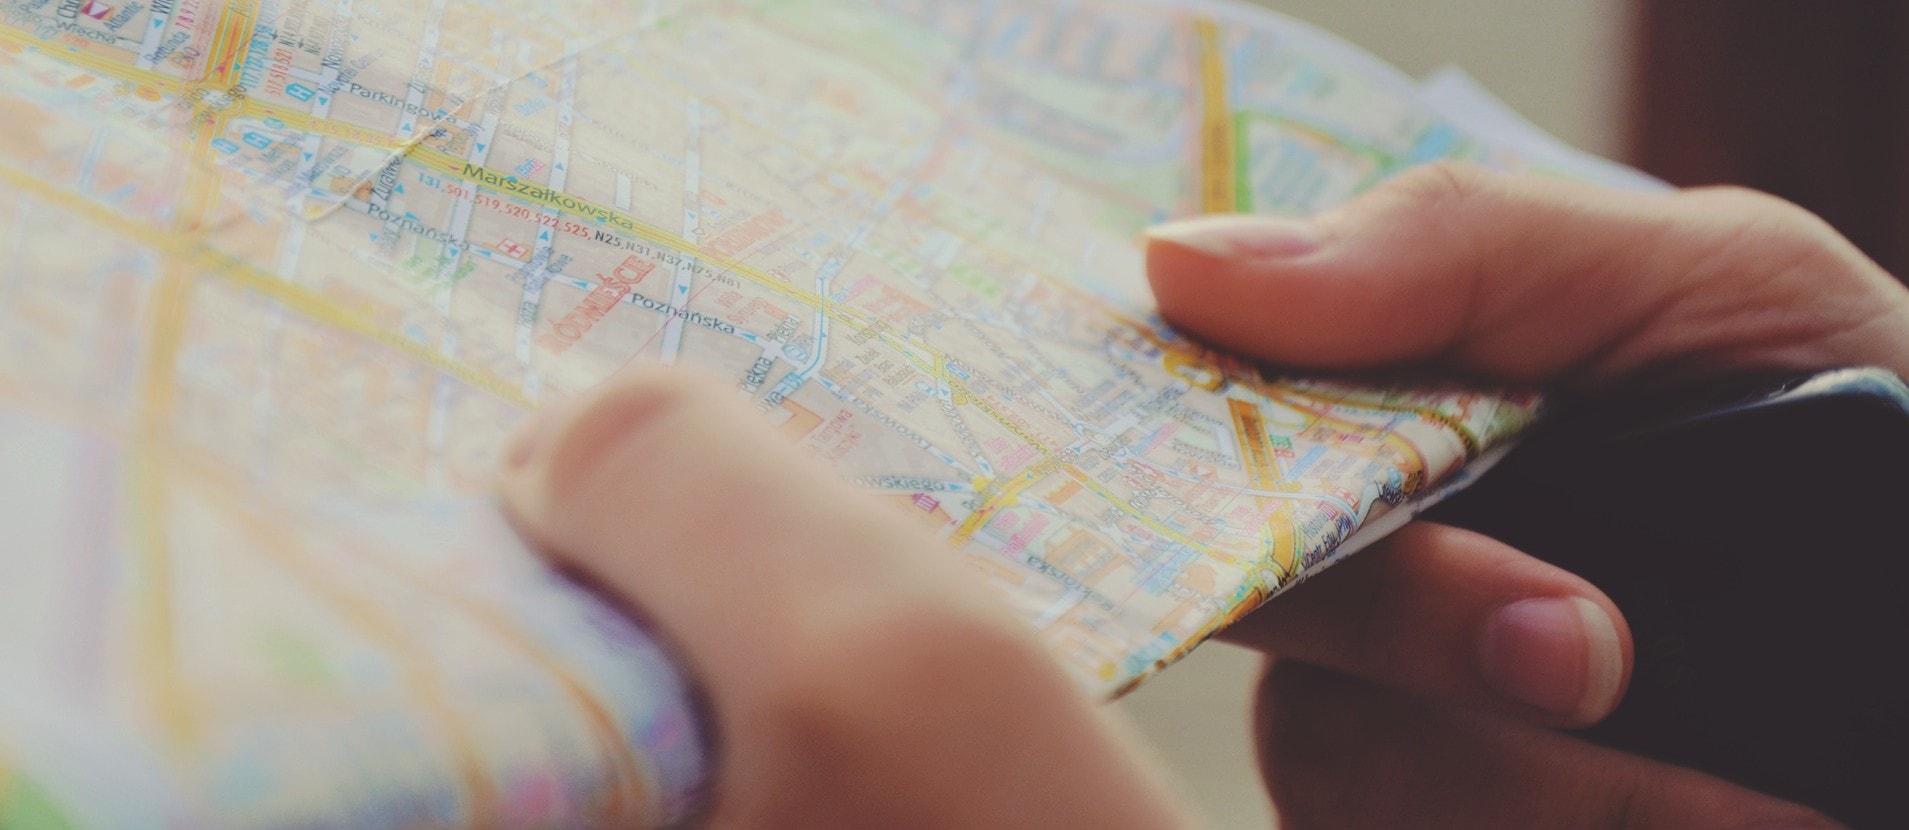 How to add a link to Google Maps with directions